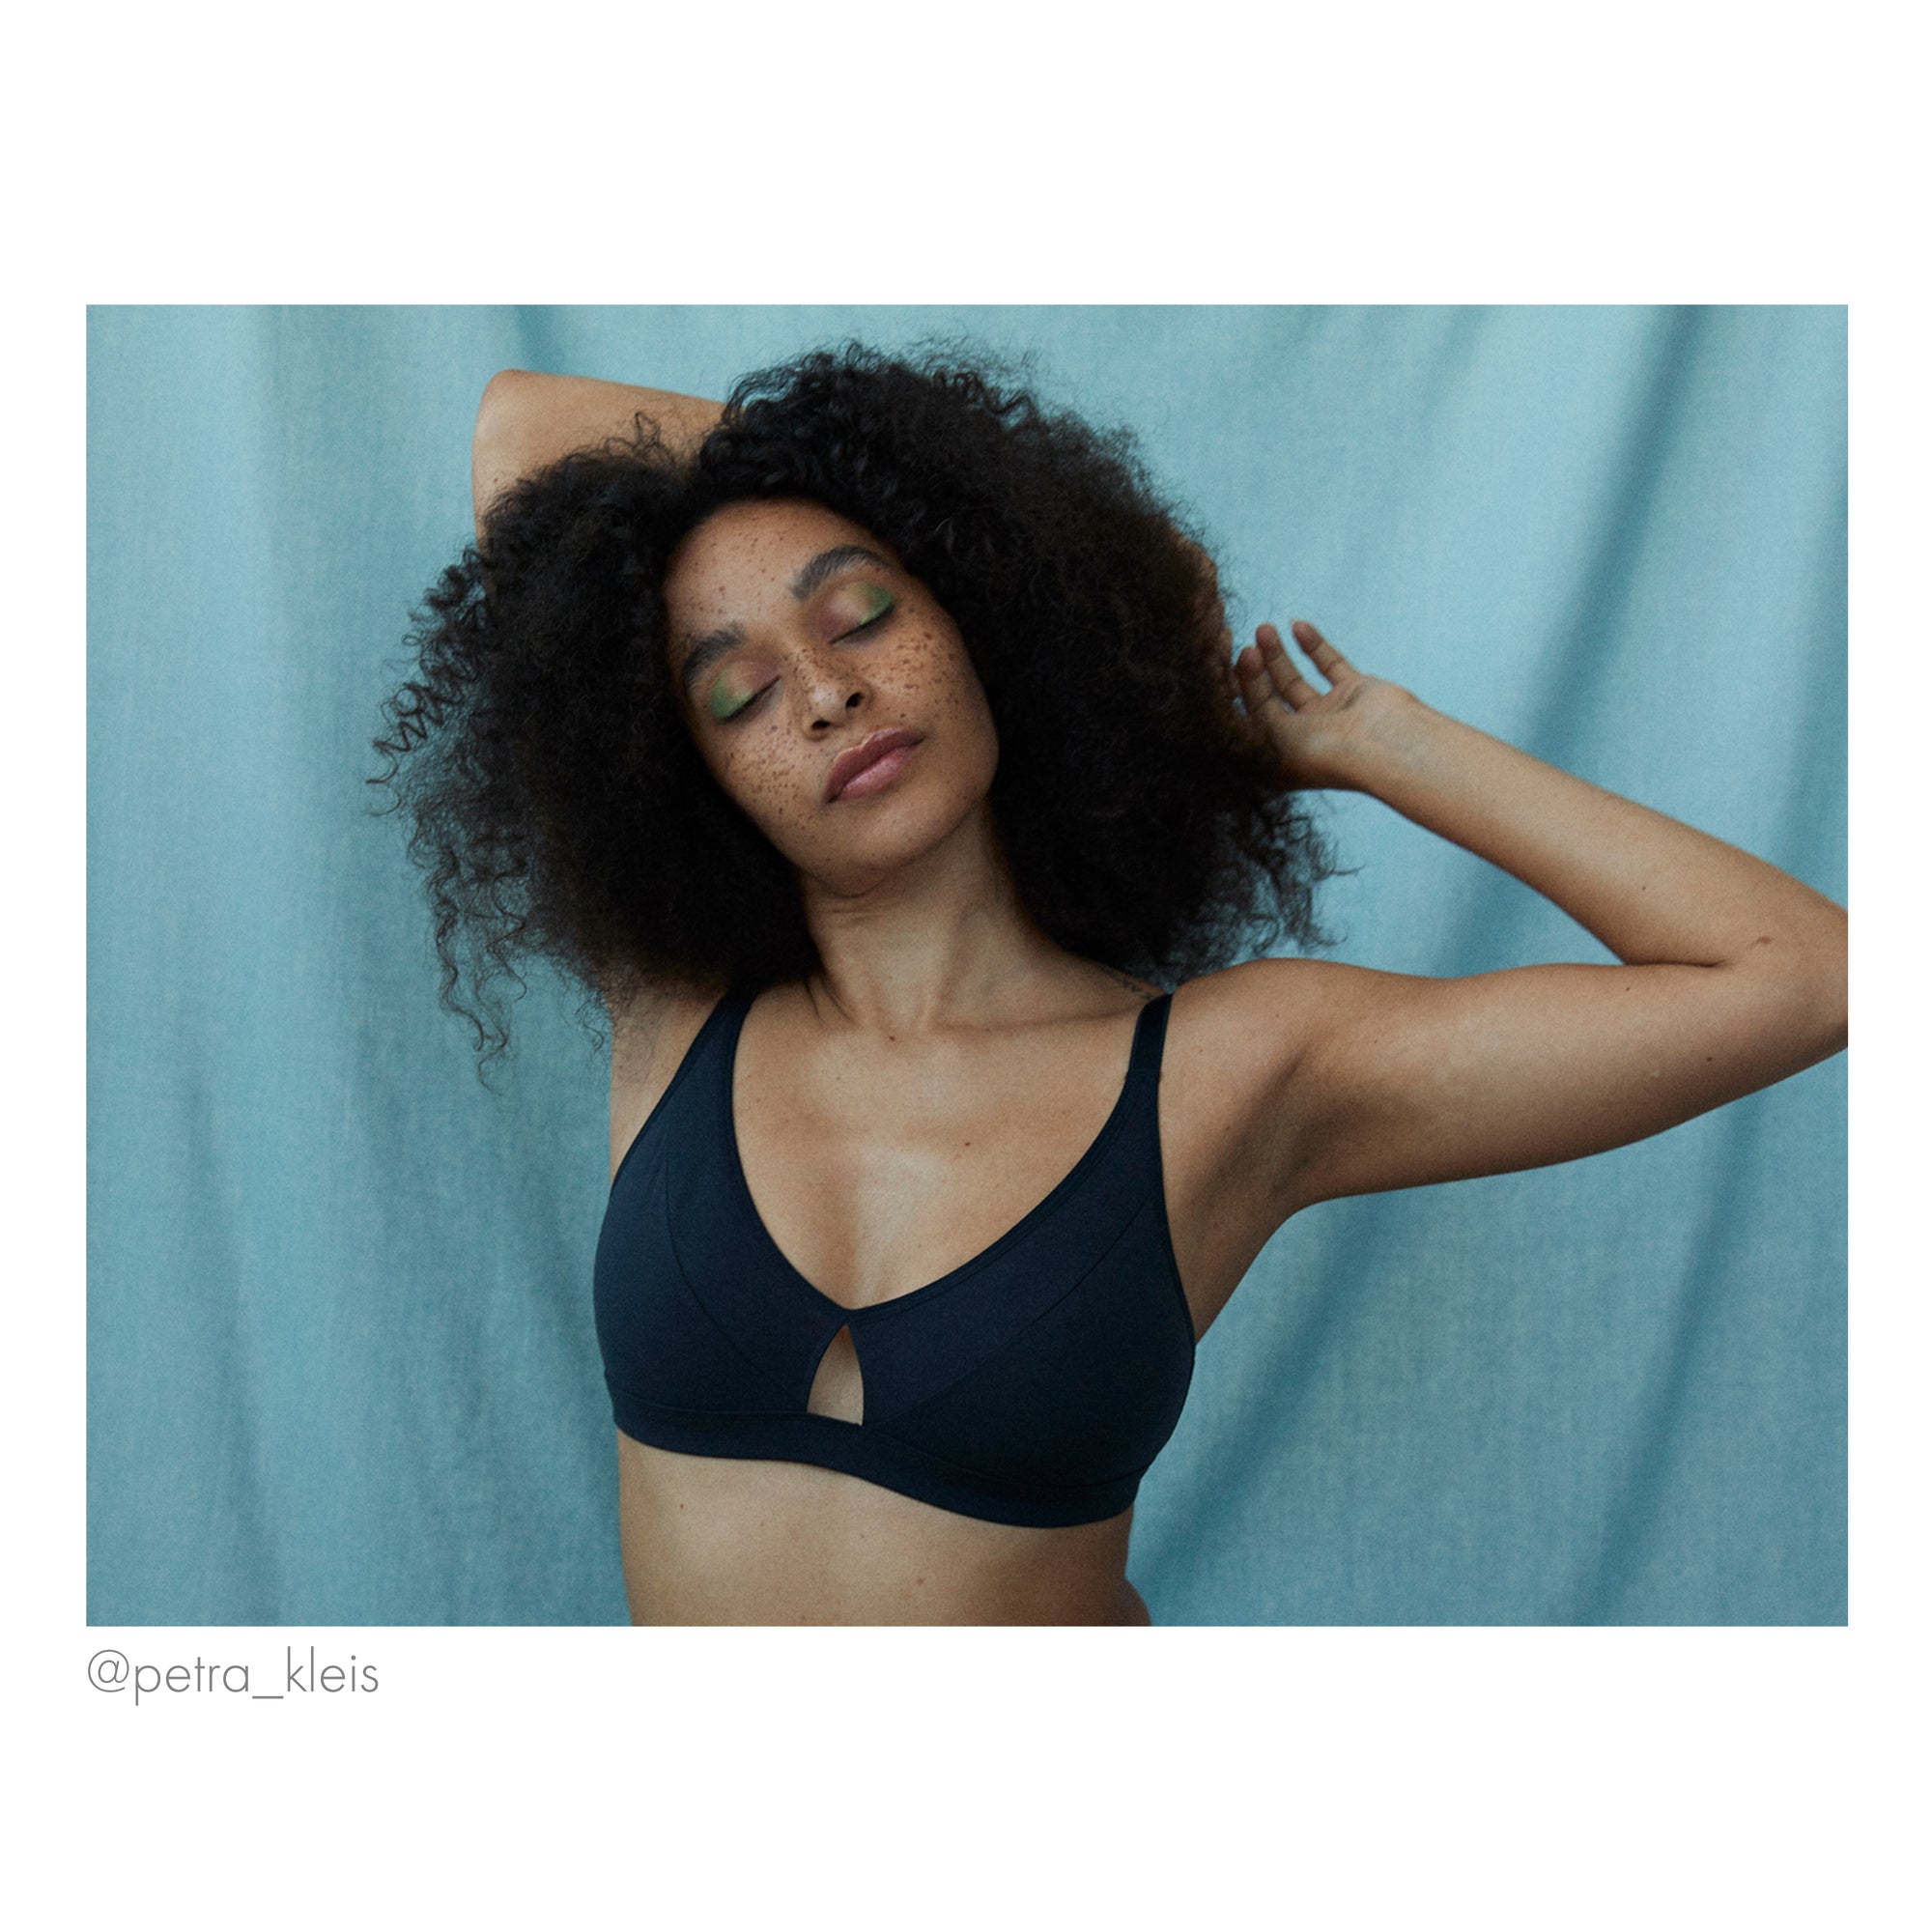 Audre organic cotton soft bra in Grey - Moons and Junes